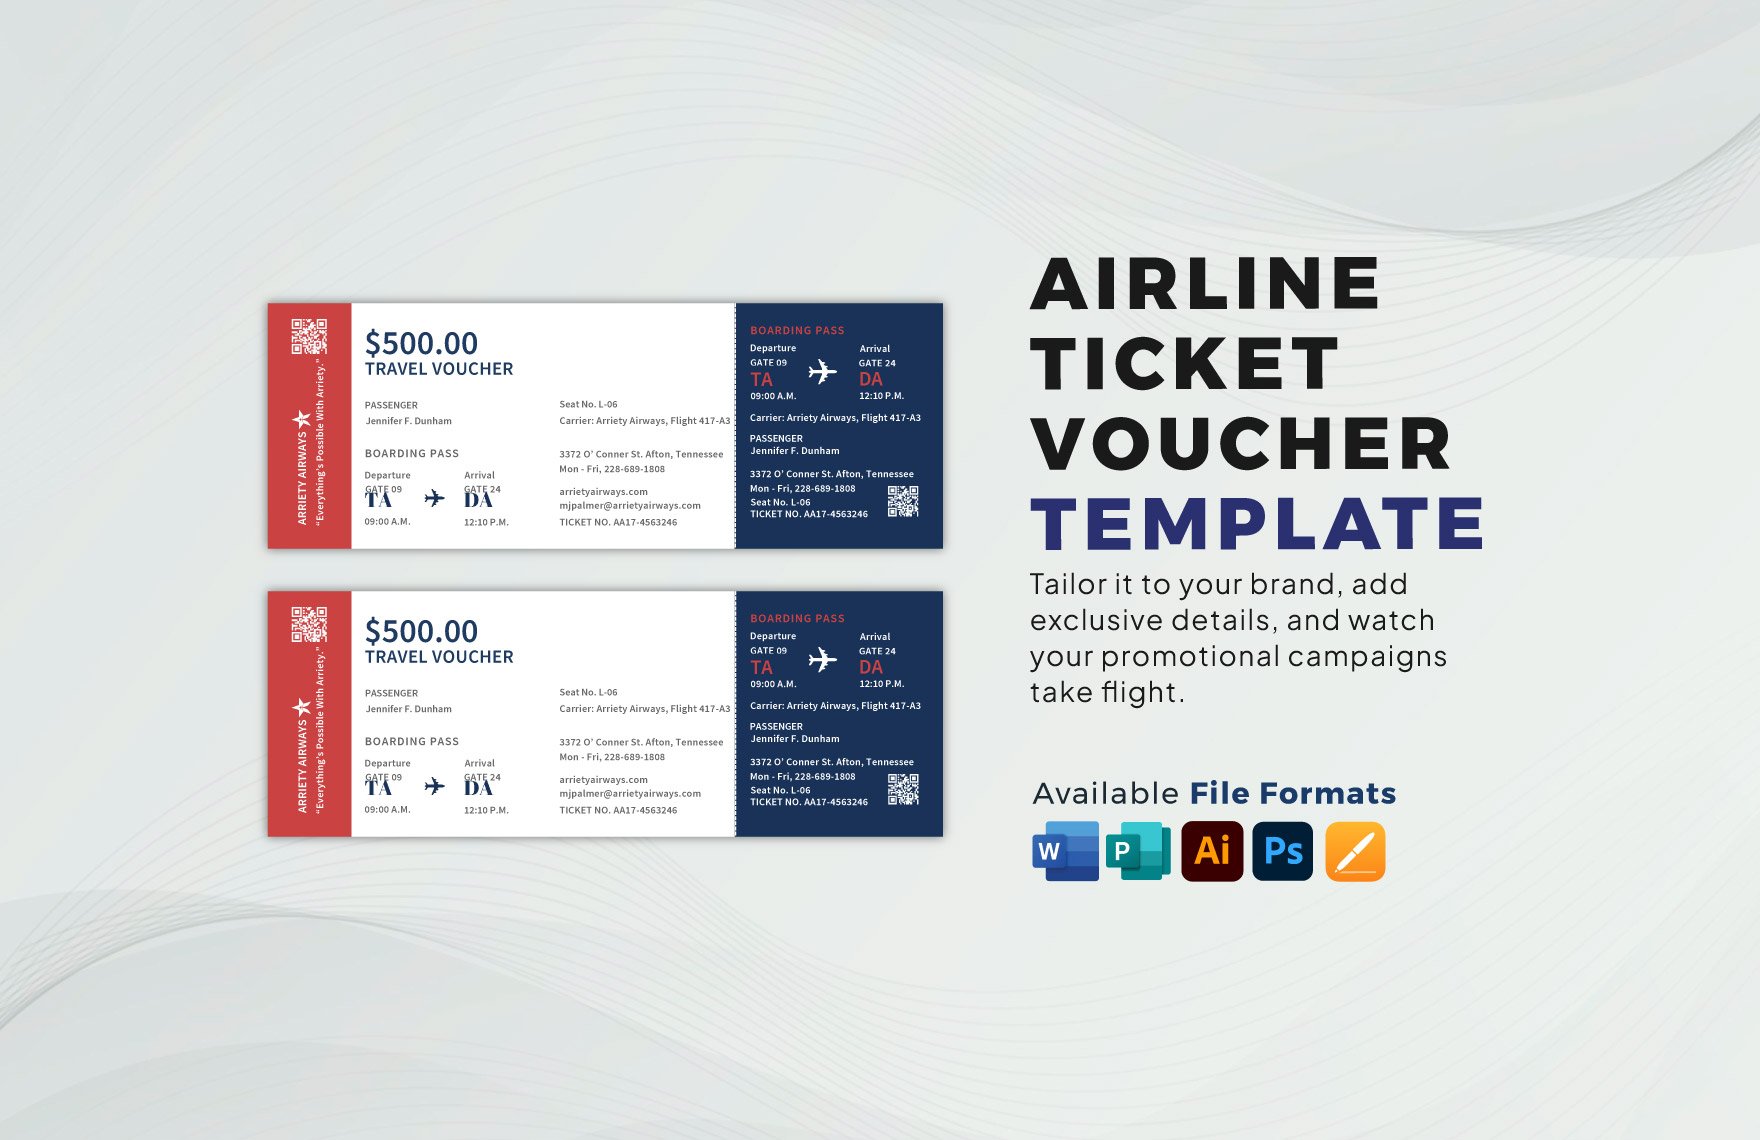 Airline Ticket Voucher Template in Word, Illustrator, PSD, Apple Pages, Publisher